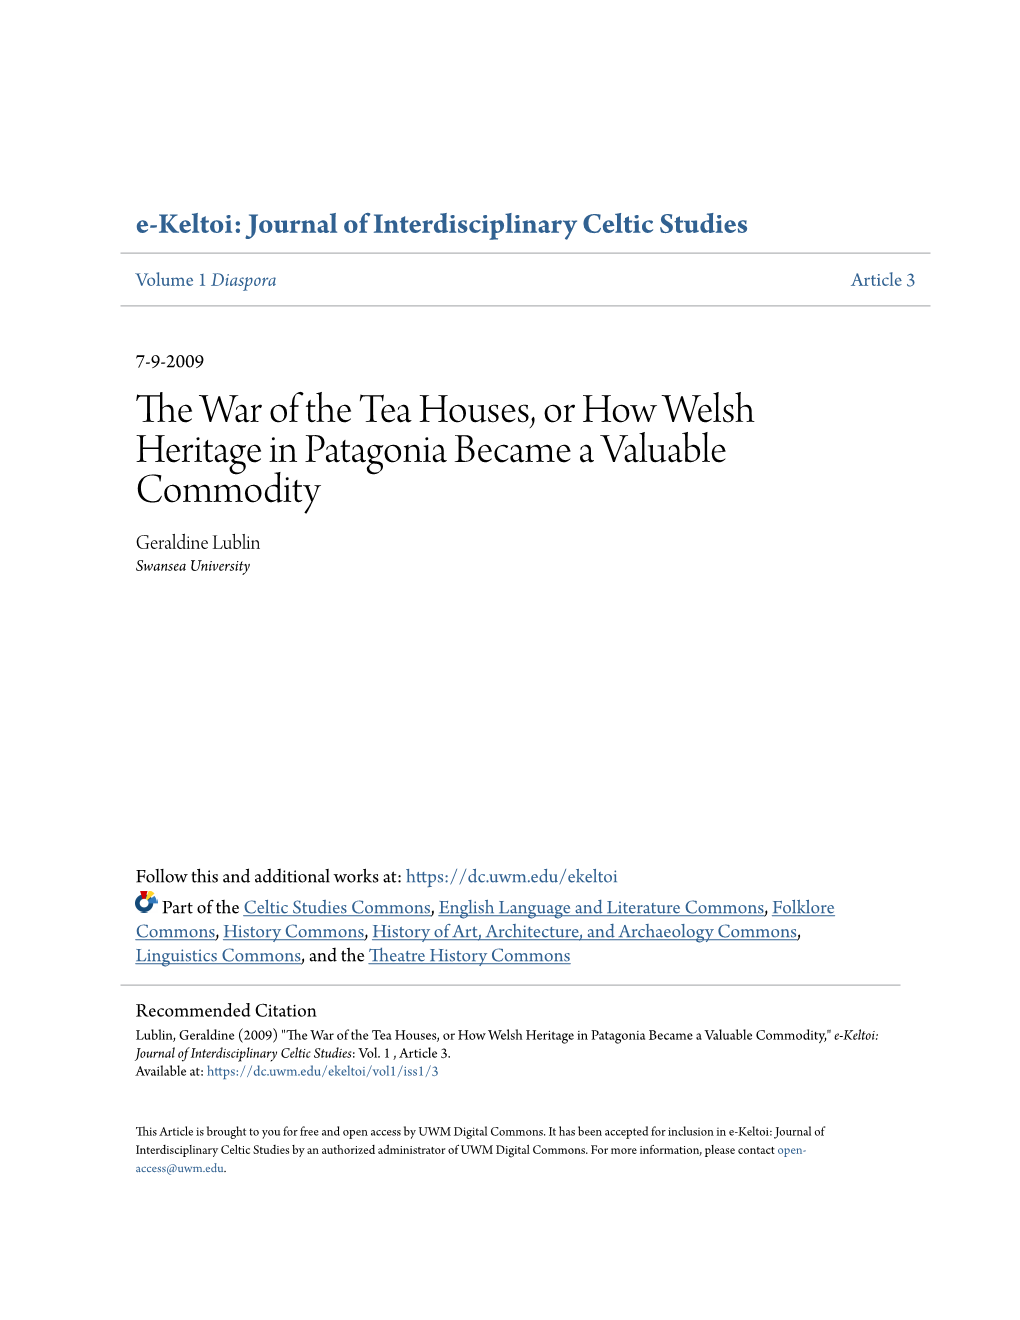 The War of the Tea Houses, Or How Welsh Heritage in Patagonia Became a Valuable Commodity1